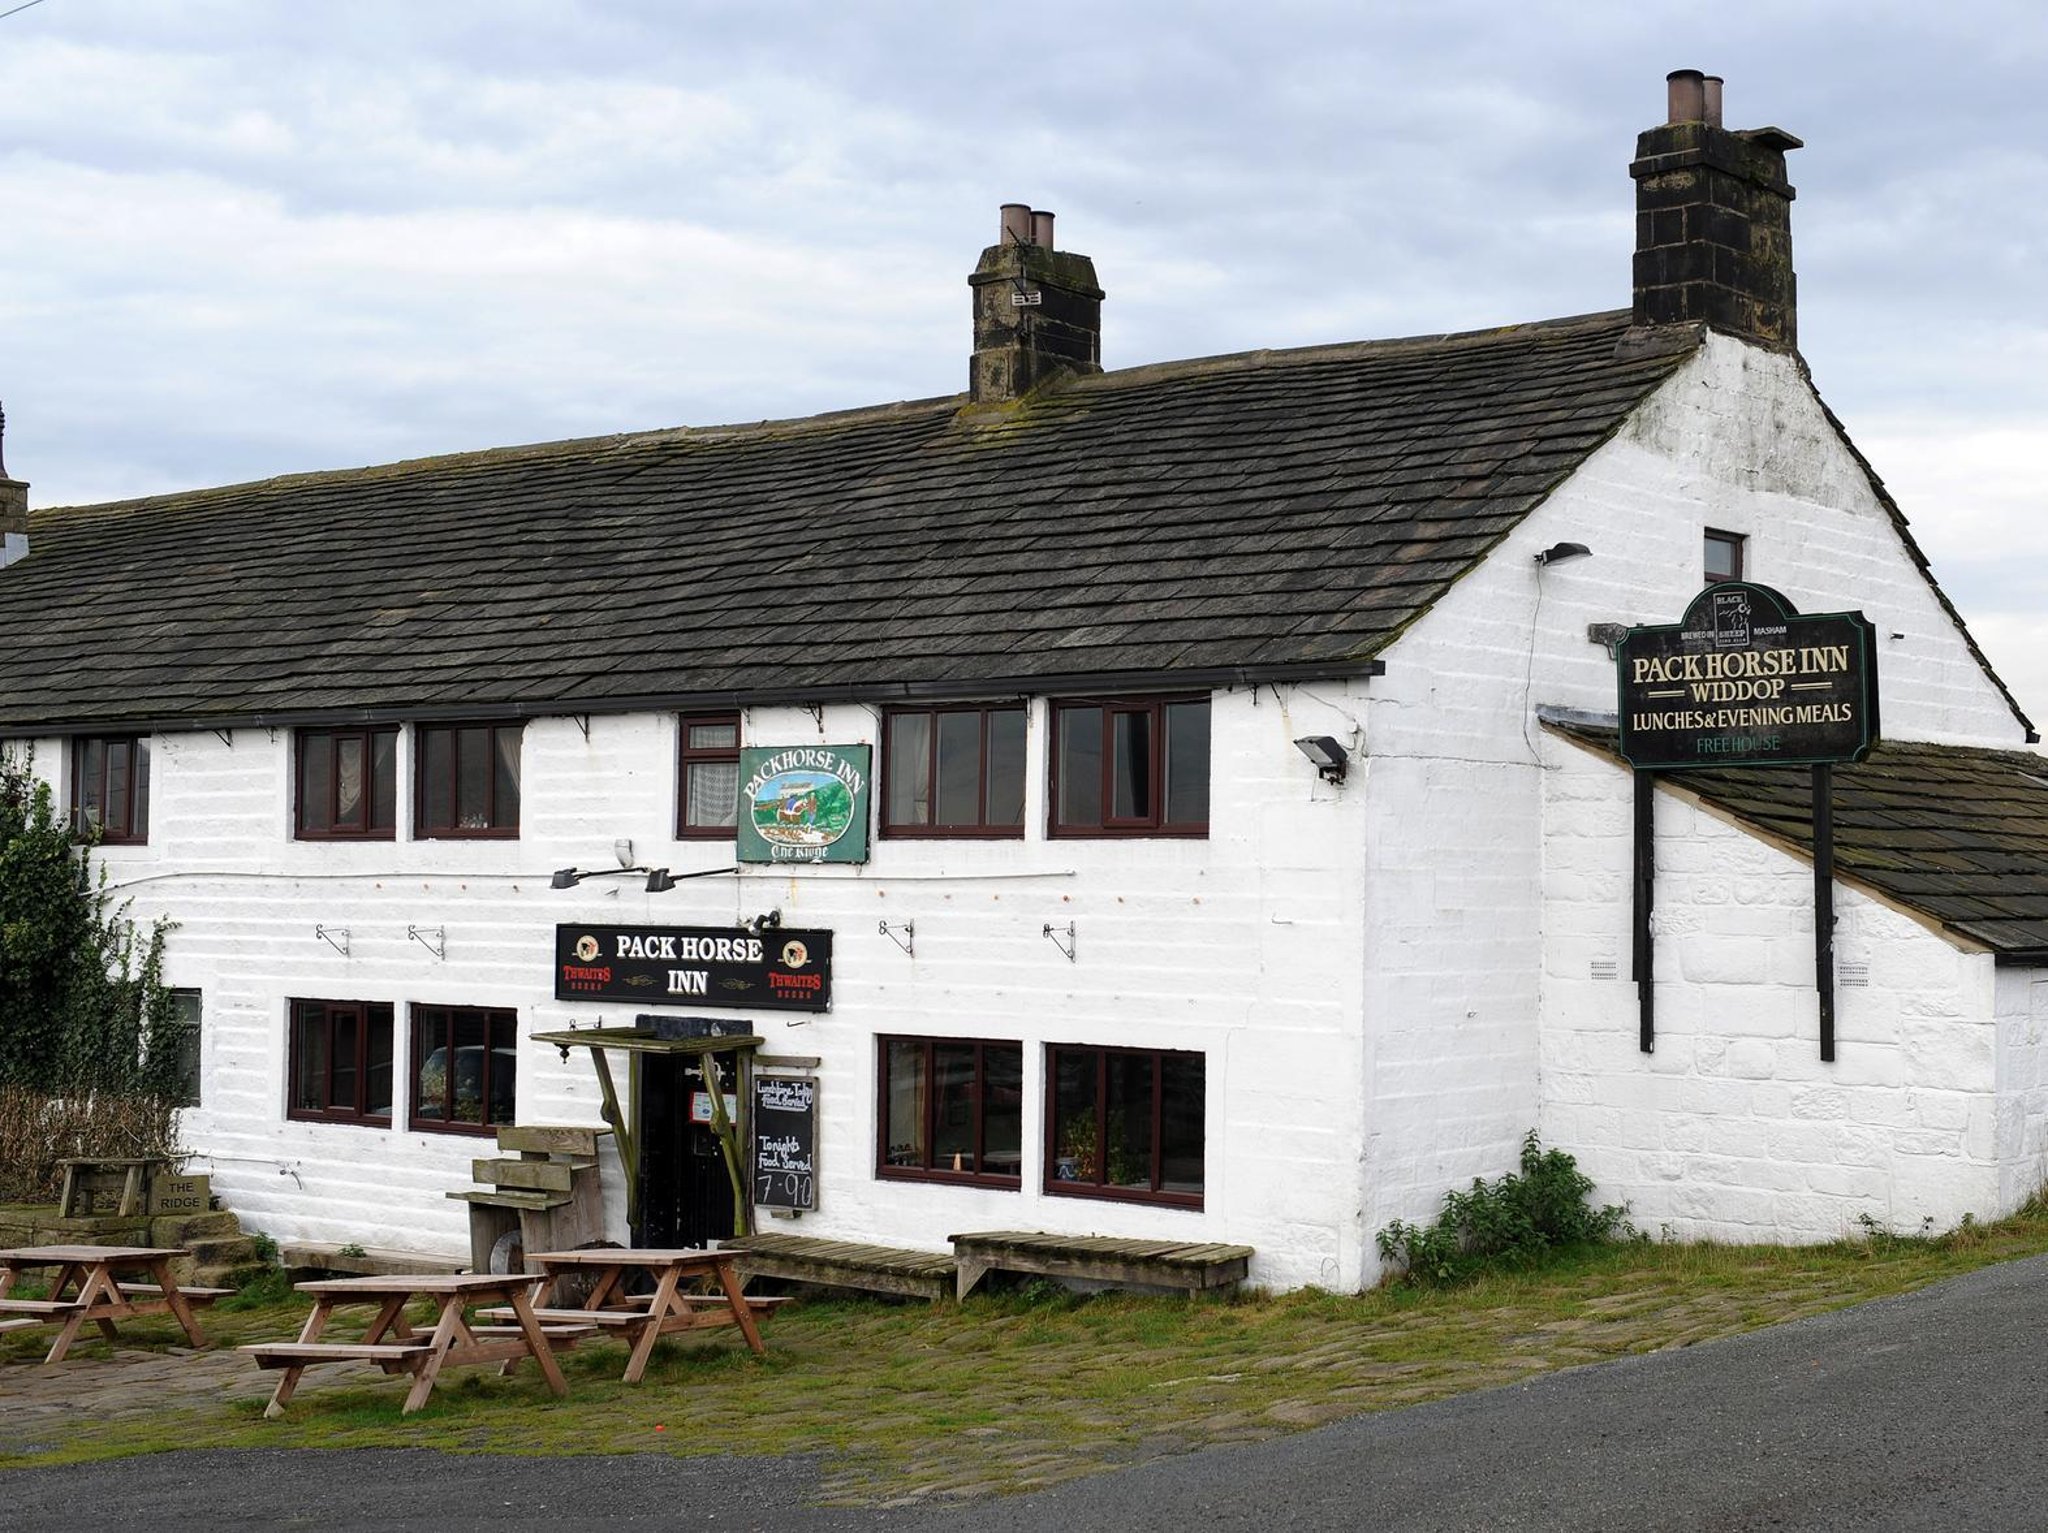 The Pack Horse Inn in Widdop closes permanently after being hit by pandemic